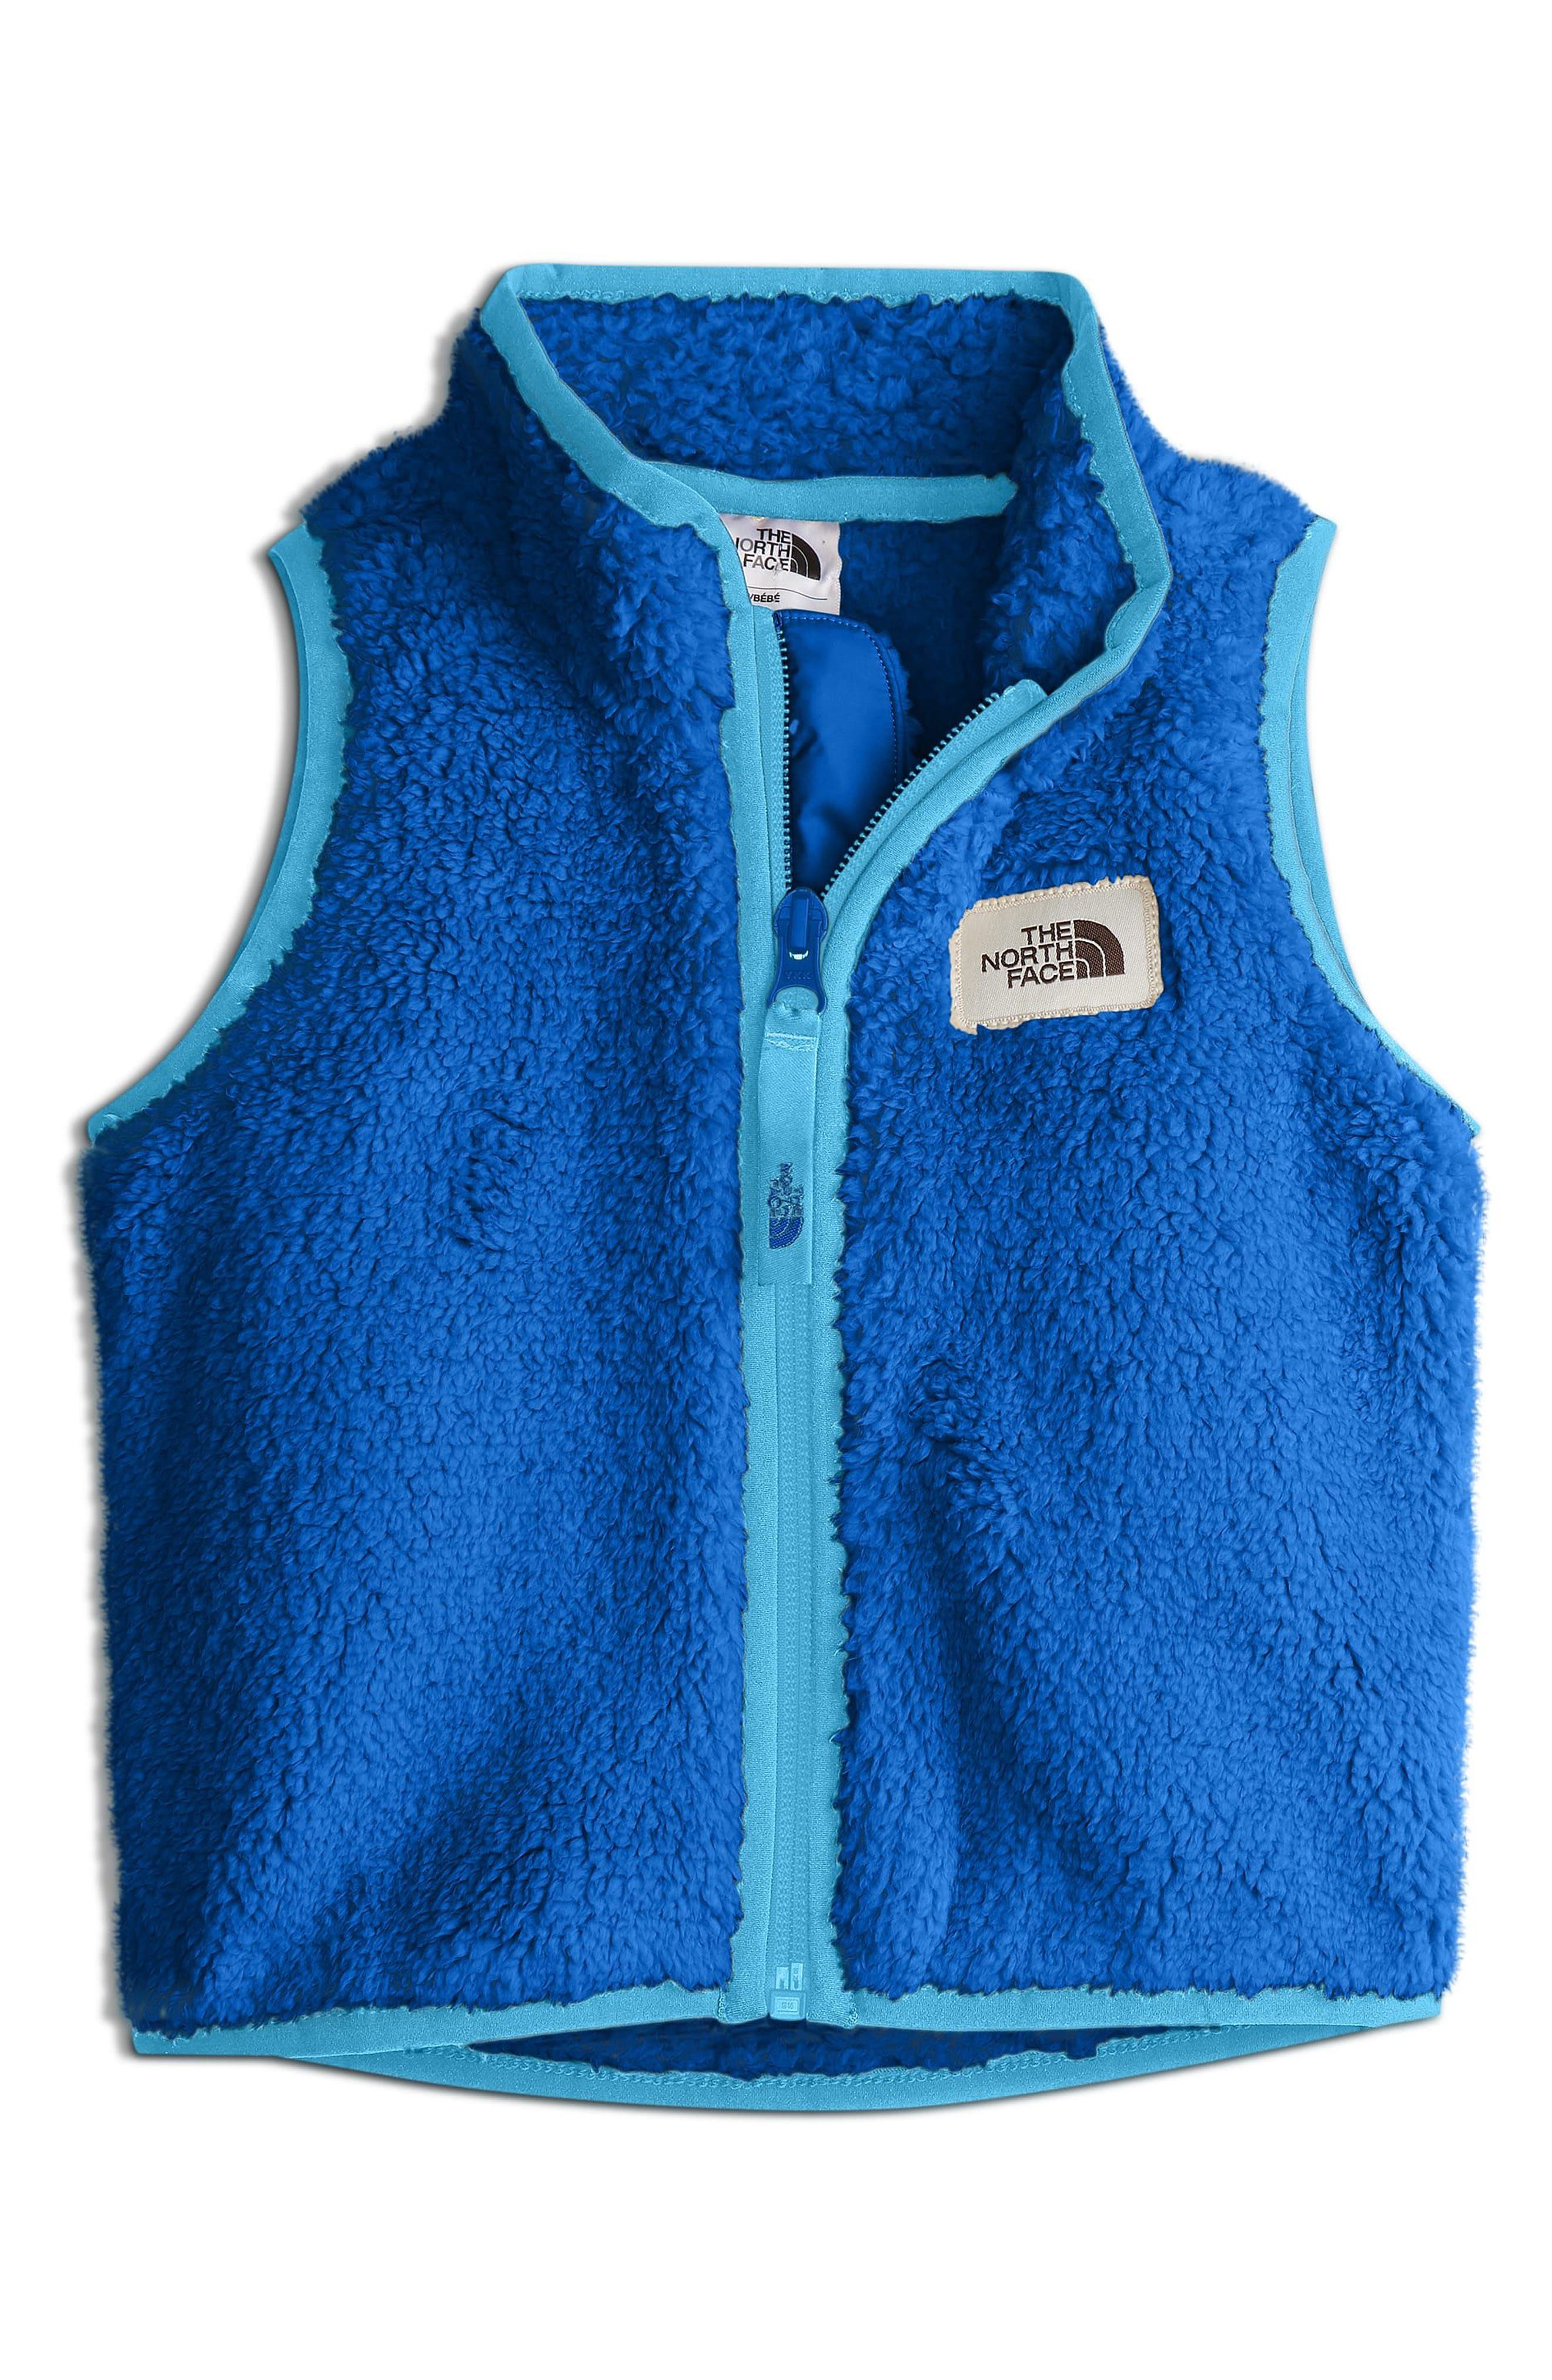 The North Face | Campshire Fleece Vest 